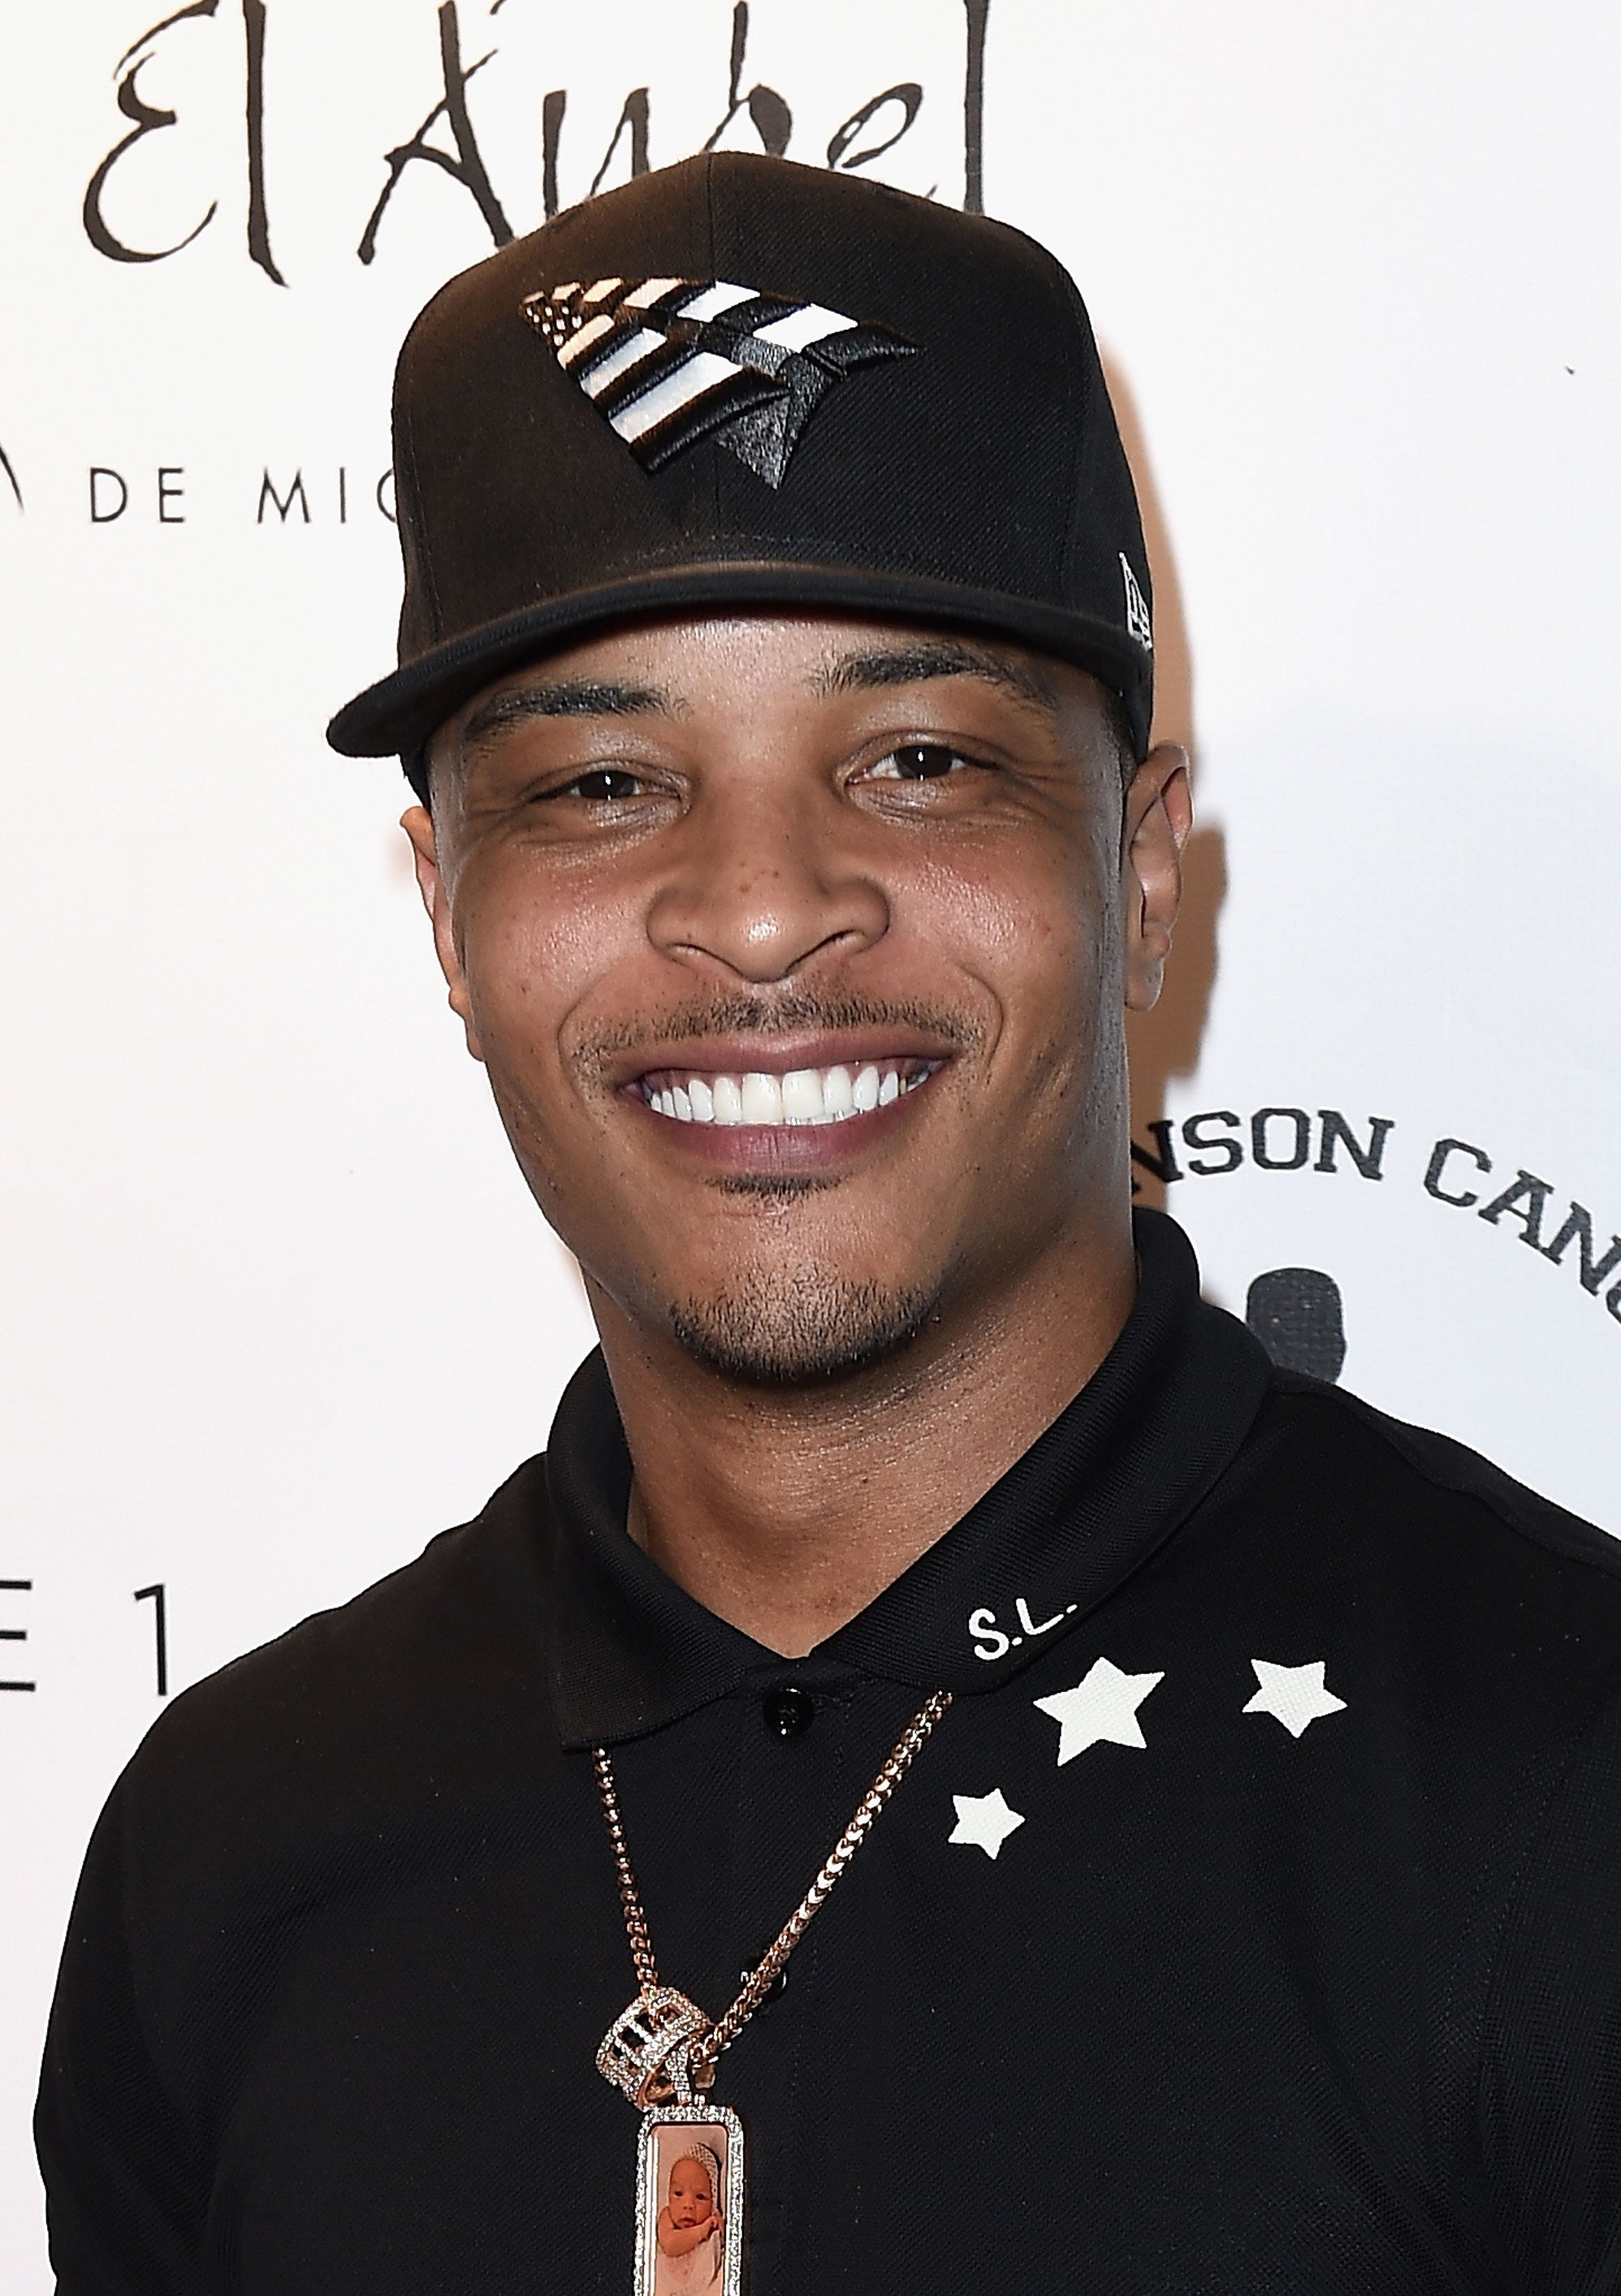  T.I. On Trump: "I Don’t Believe Any Lives Matter To Him"
